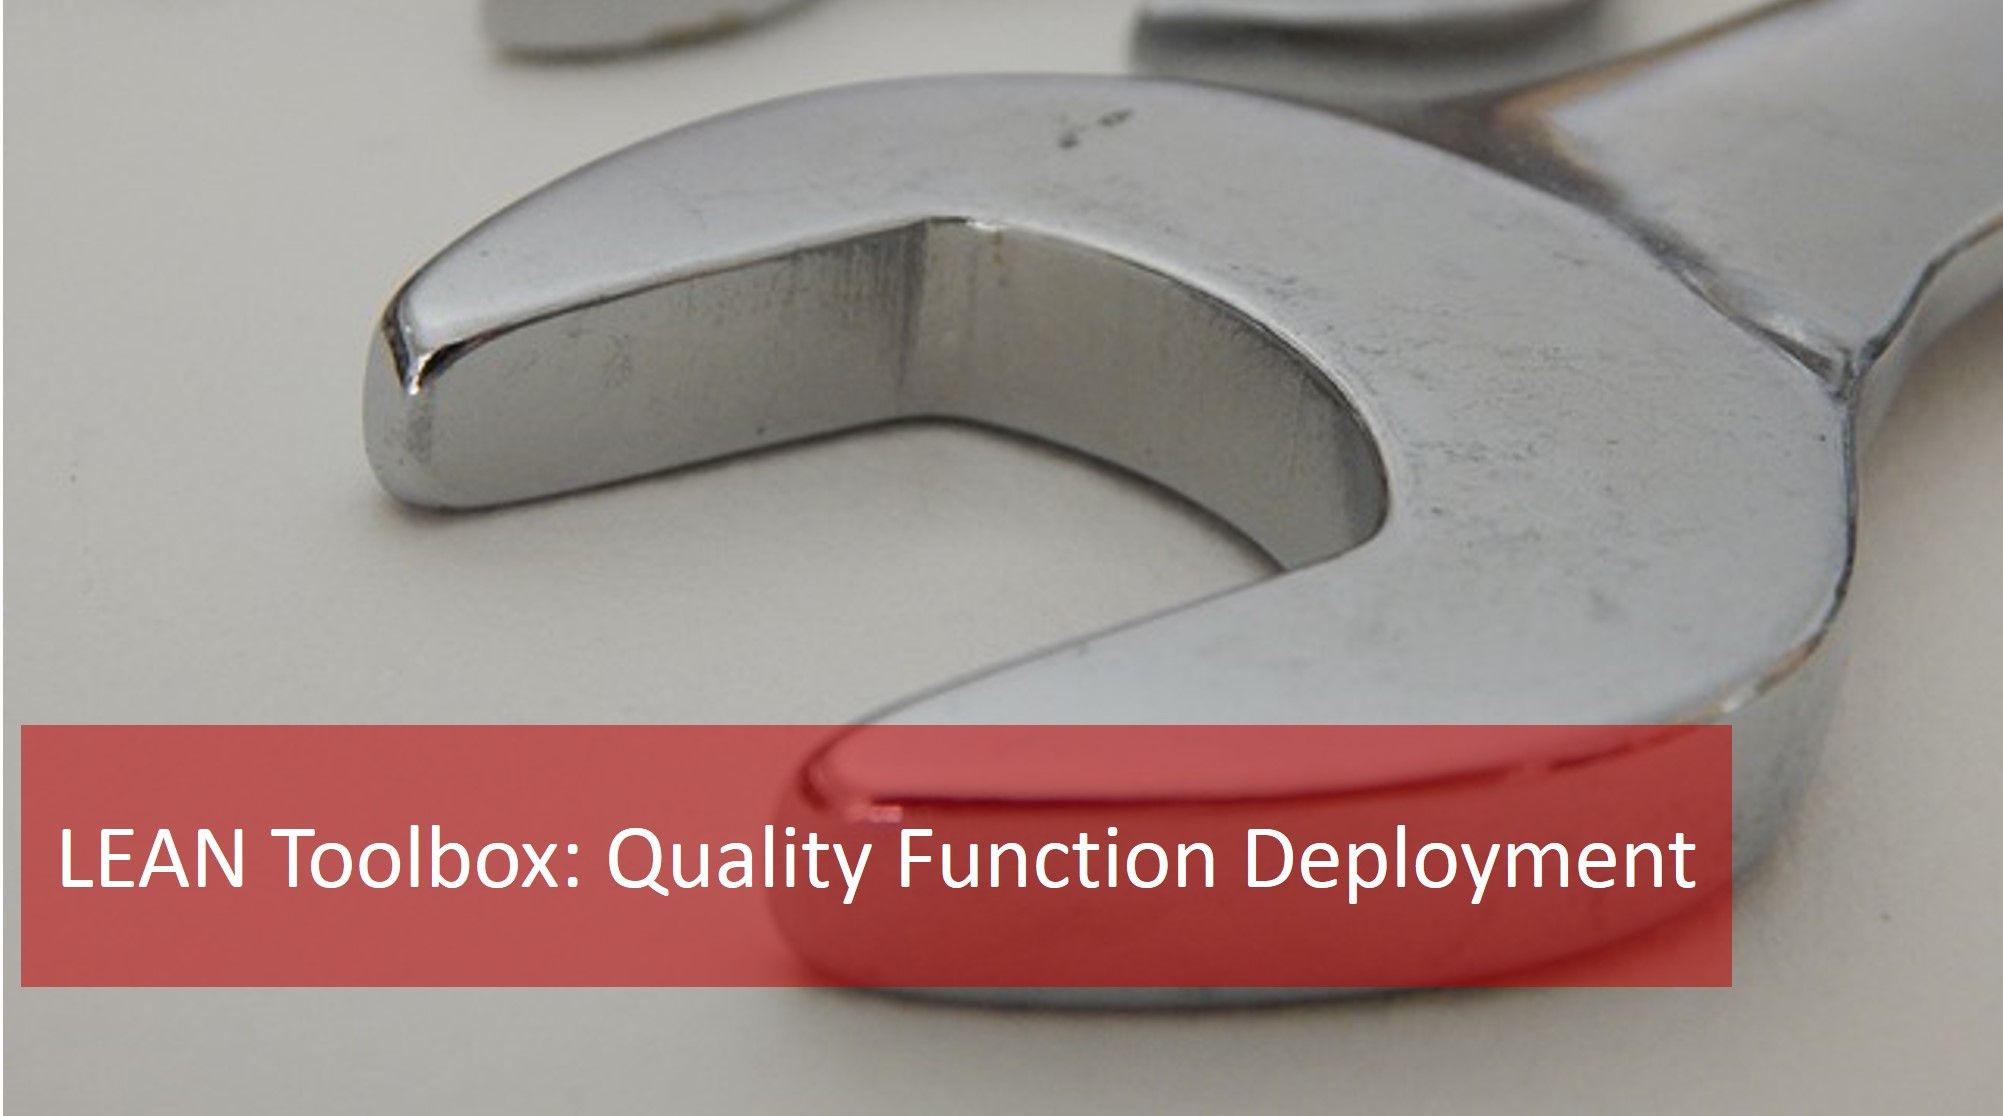 What Is Quality Function Deployment (QFD) and Why Do We Use It?